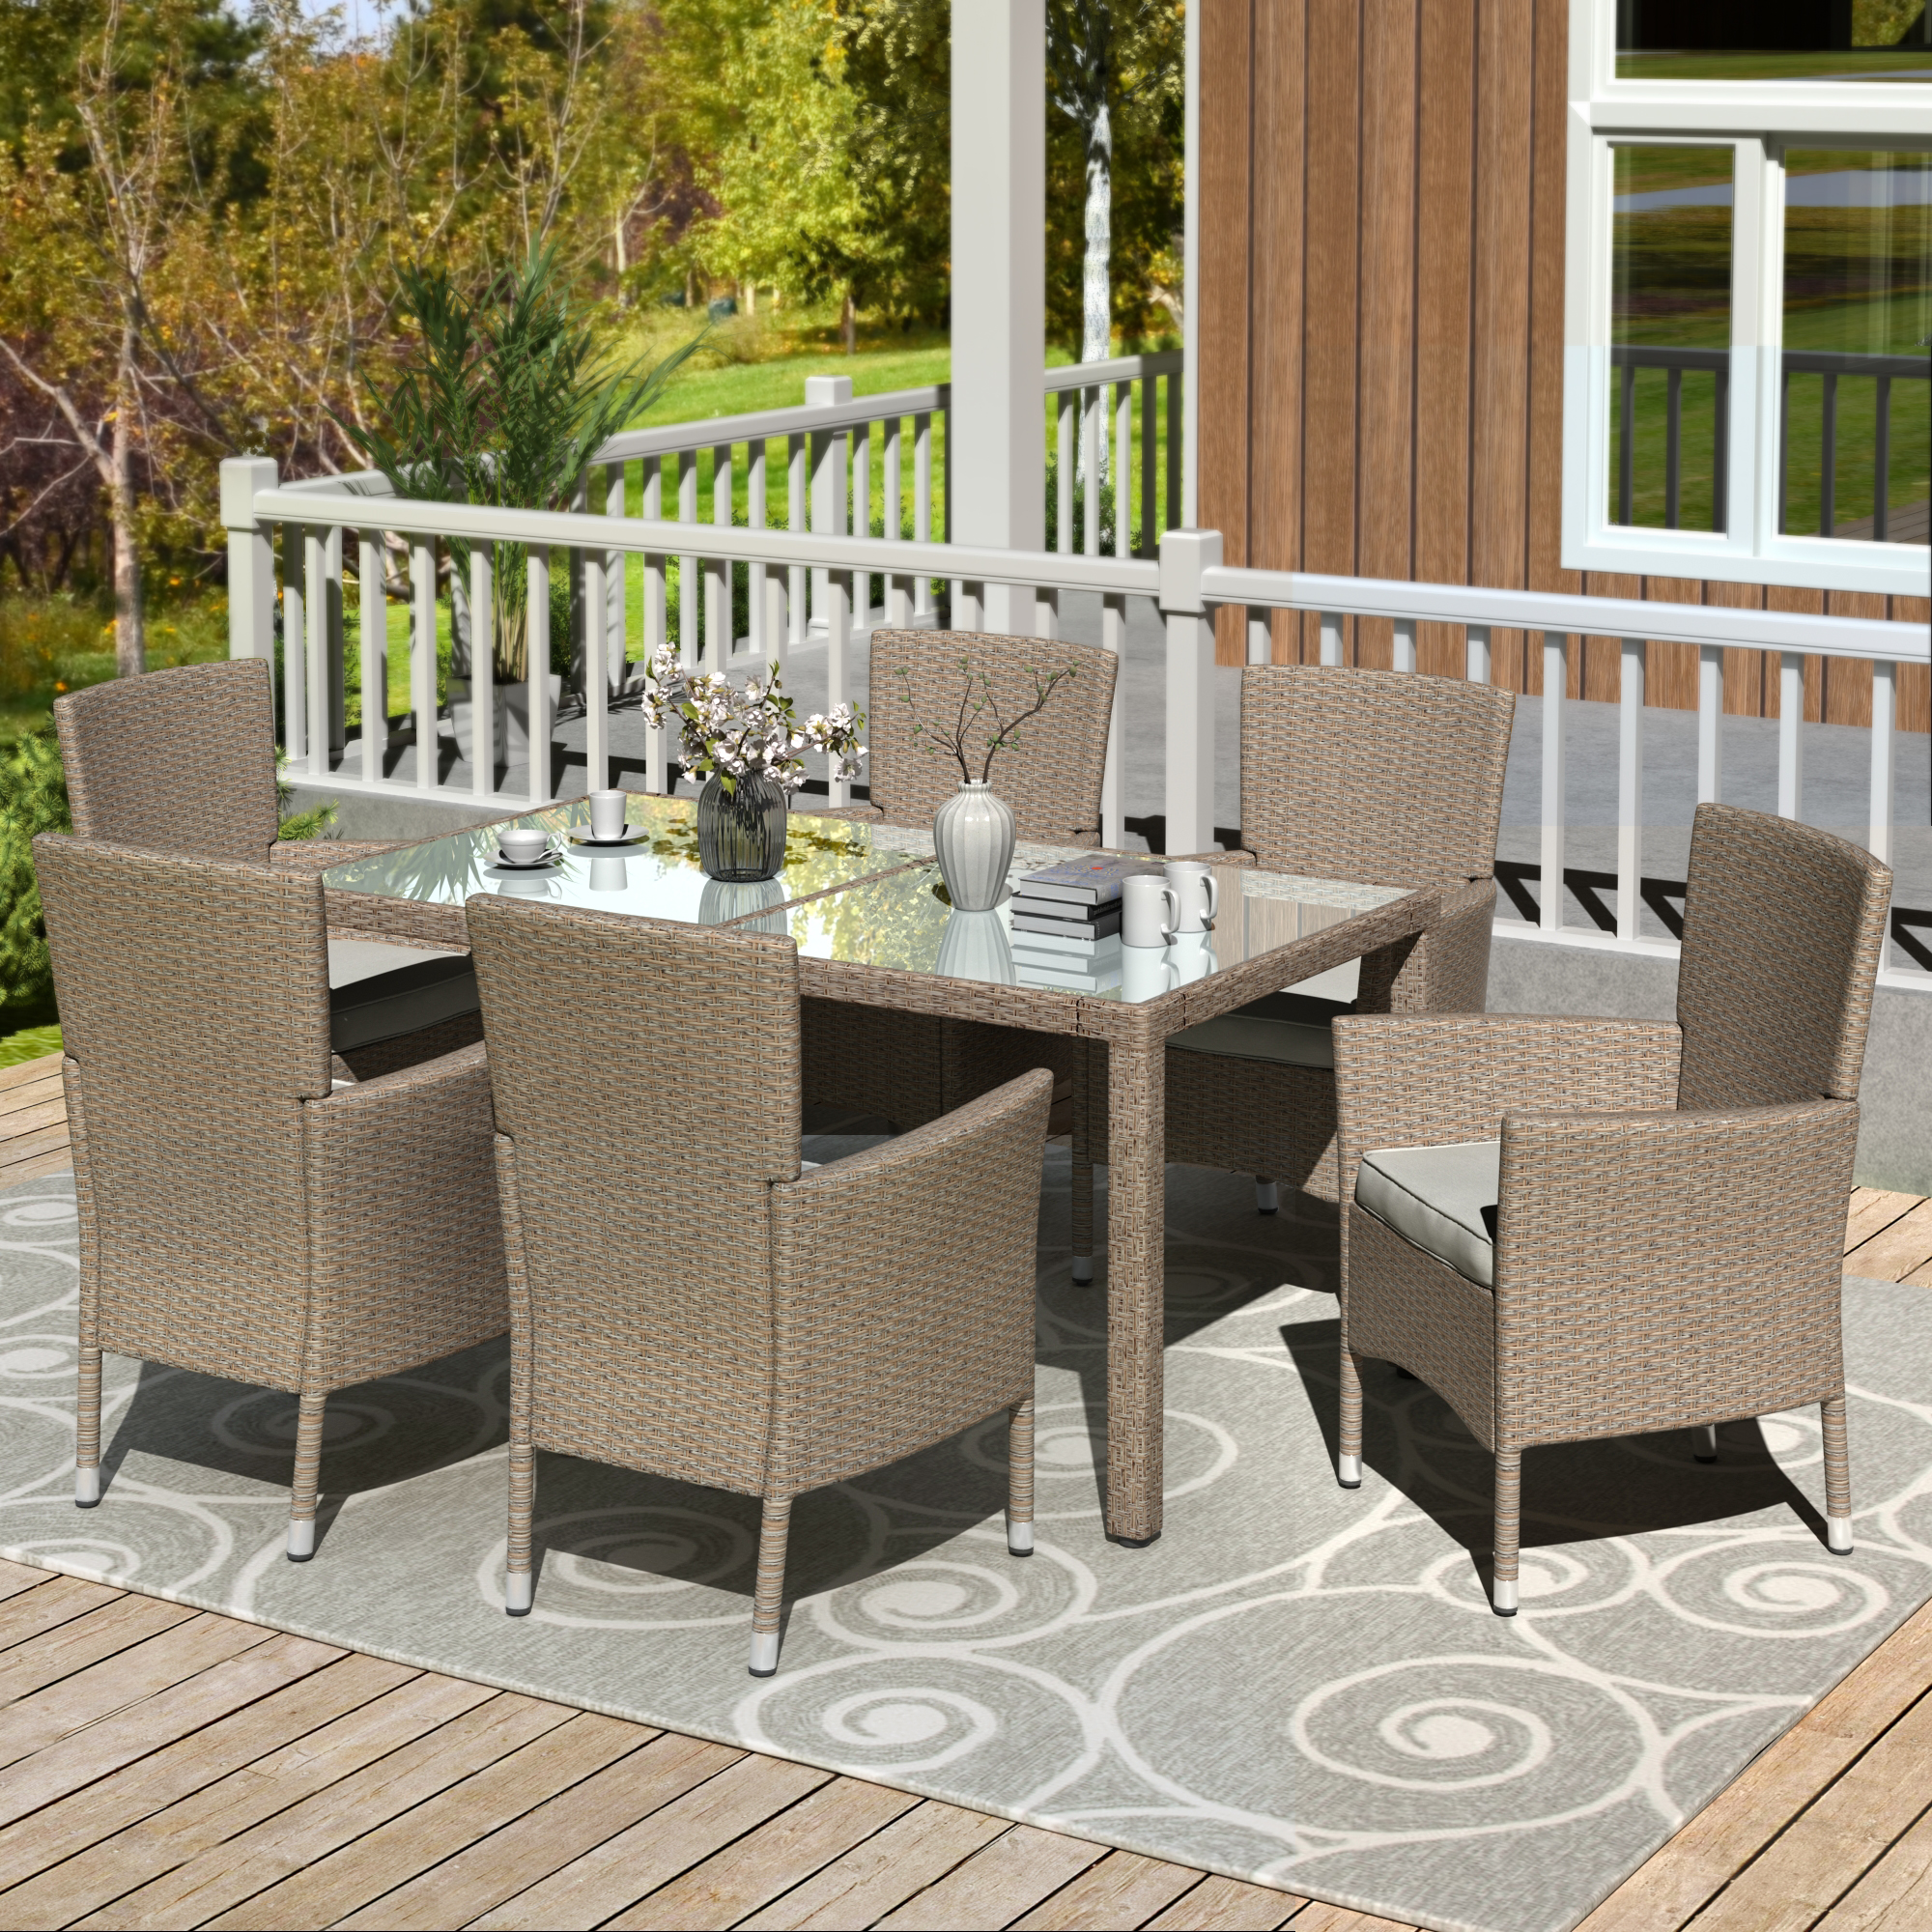 7 Piece Patio Dinning Table Beige-brown Wicker Furniture Seating - WY000053EAA